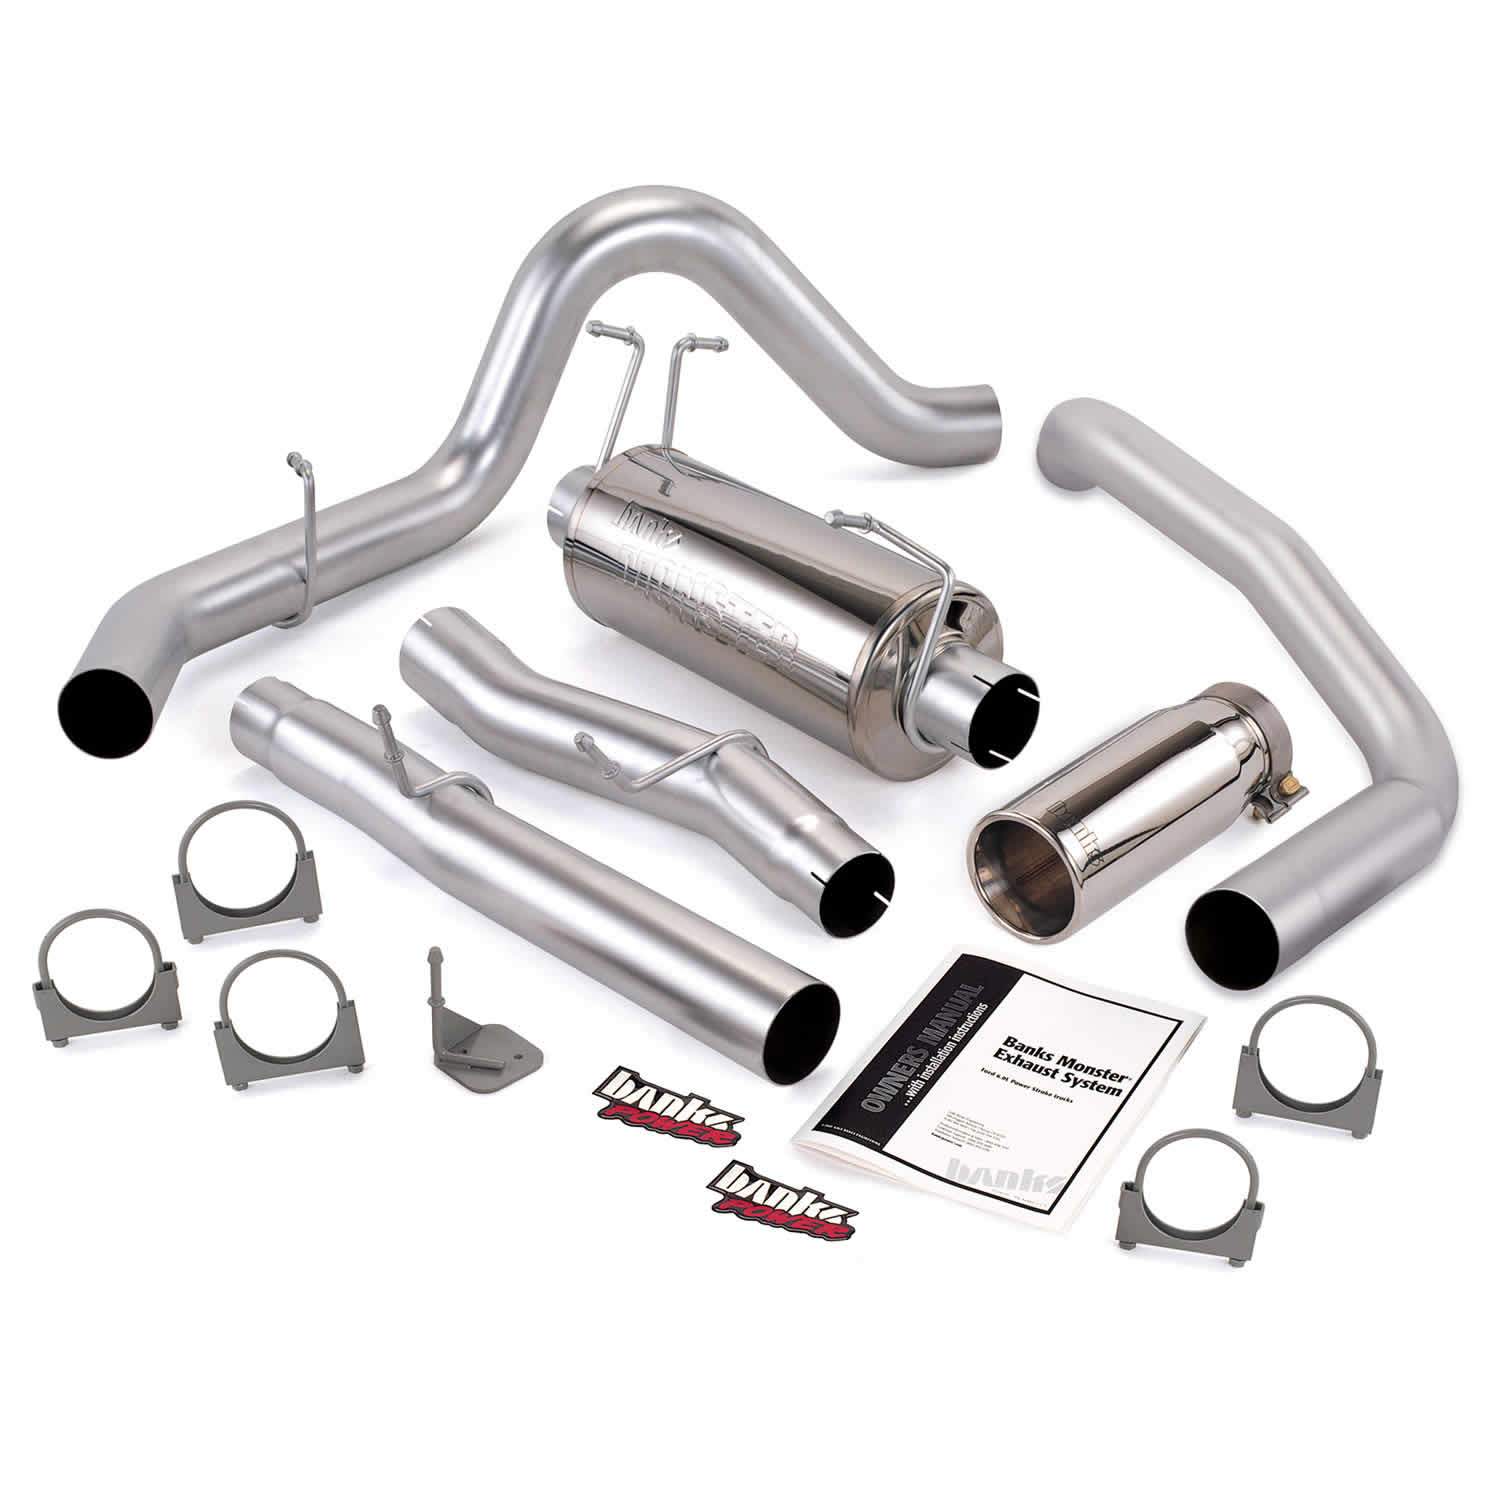 2003-2007 Powerstroke Exhaust System Kit - CCSB (48785)-Exhaust System Kit-Banks Power-48785-Dirty Diesel Customs